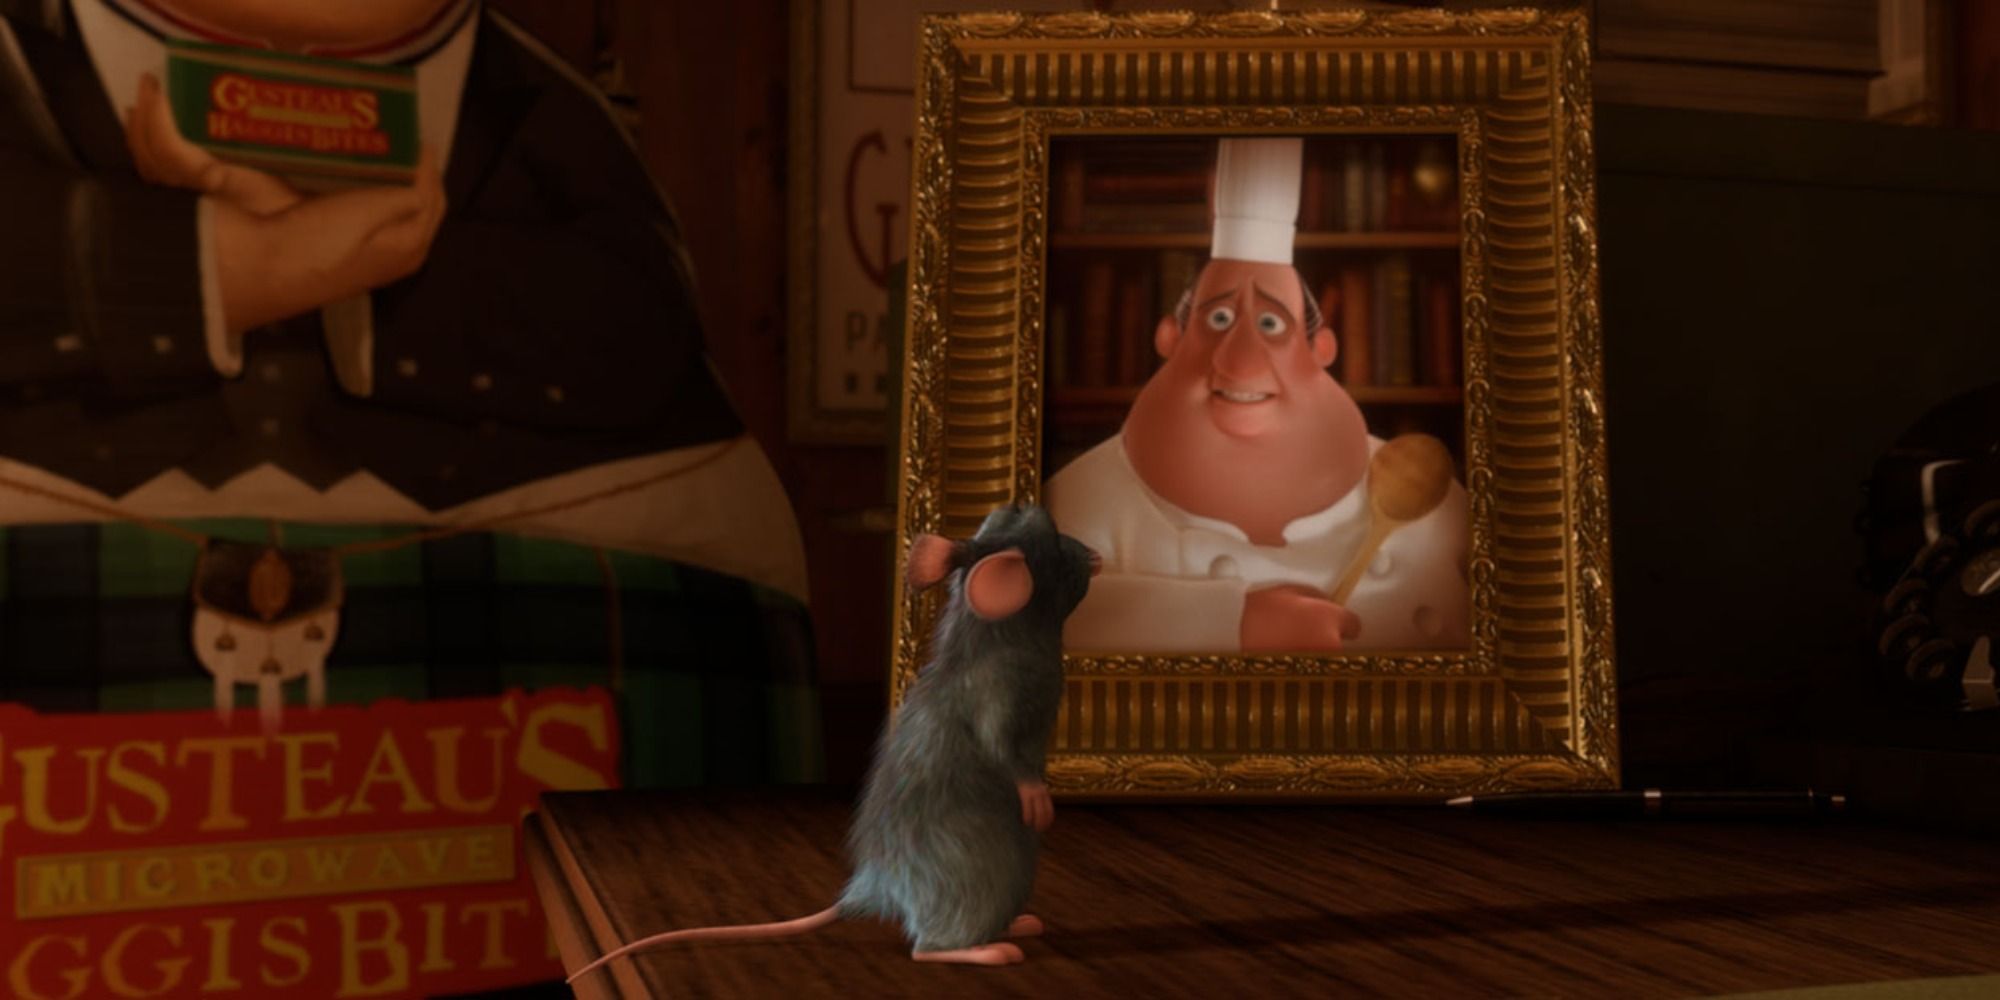 10 Best Pixar Movies For Adults, According To Reddit